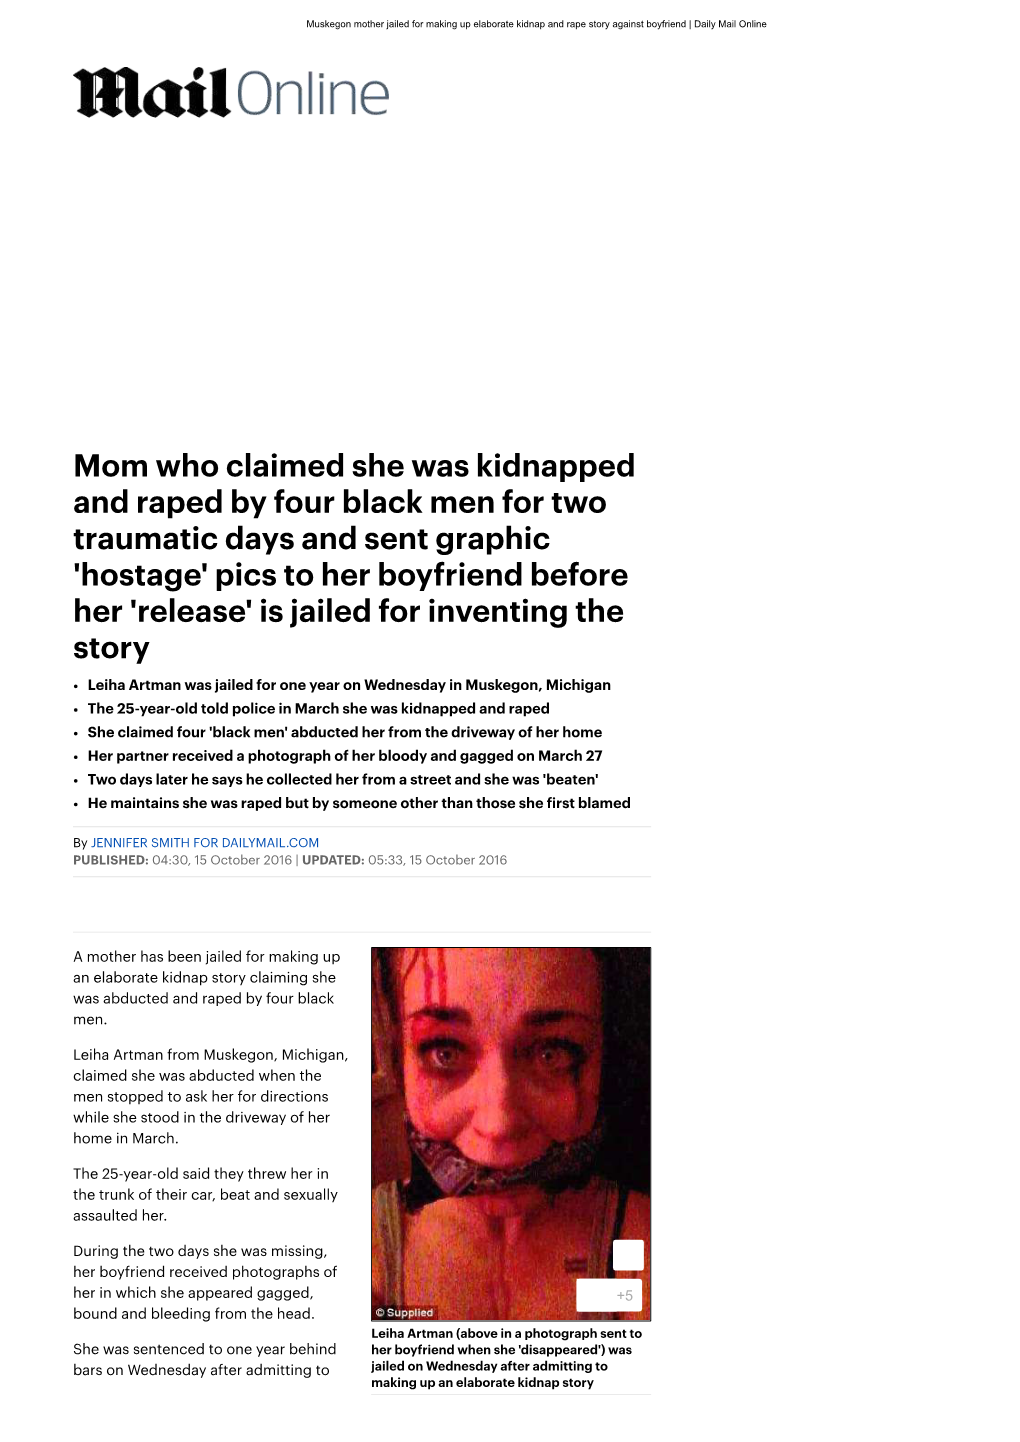 Mom Who Claimed She Was Kidnapped and Raped by Four Black Men